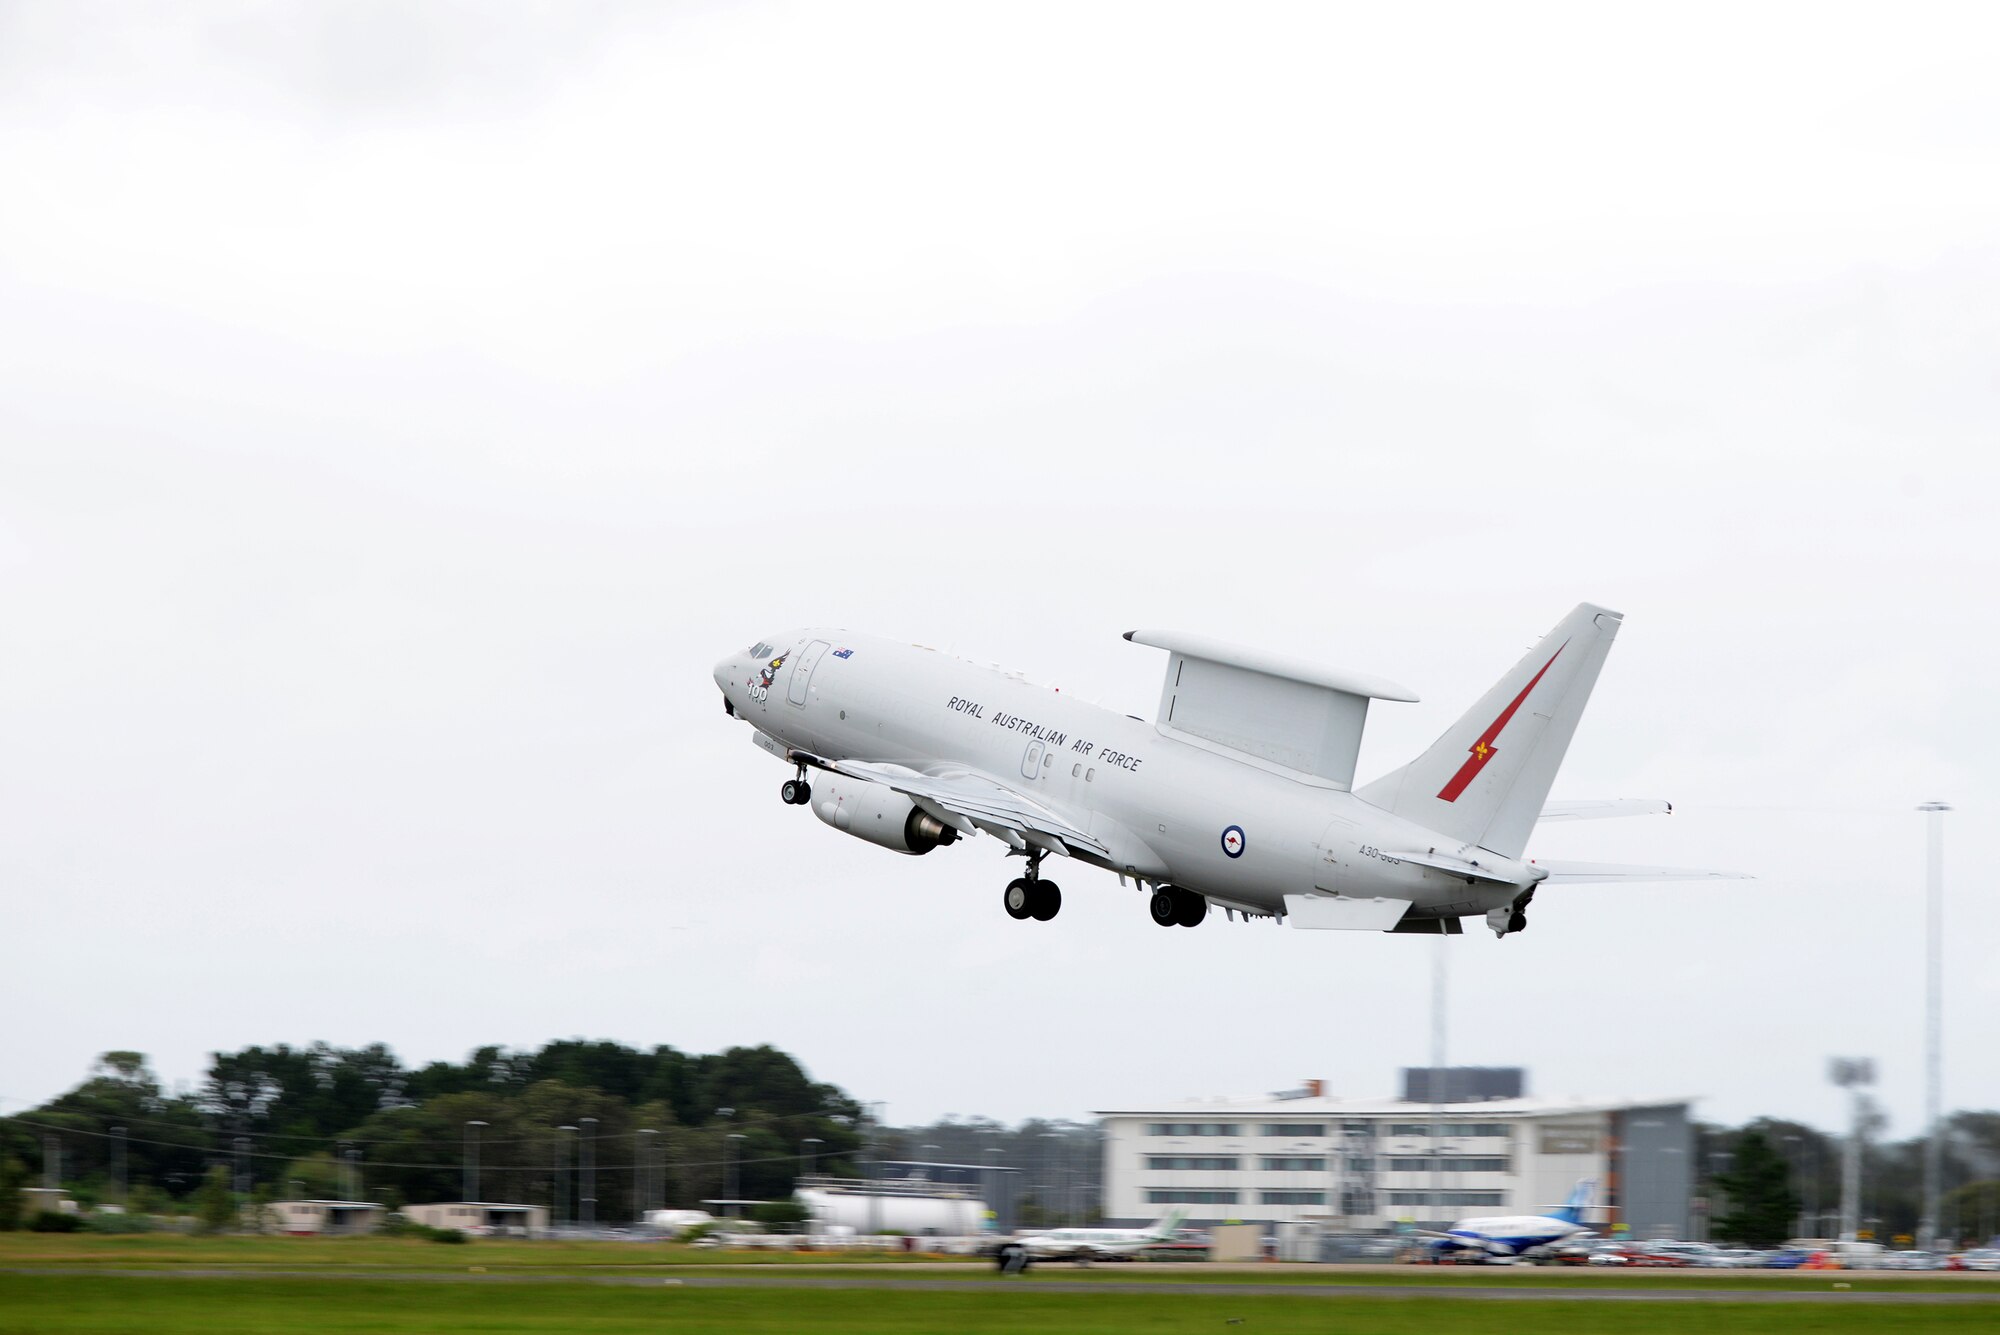 A Royal Australian Air Force AP-3C Orion takes off at RAAF Williamtown, during Exercise Diamond Shield 2017 in New South Wales, Australia, March 23, 2017. The RAAF AP-3C is a critical component during the exercise as it is fitted with a variety of sensors, including digital multi-mode radar, electronic support measures, electro-optics detectors, magnetic anomaly detectors, friend or foe identification systems and acoustic detectors. (U.S. Air Force photo by Tech. Sgt. Steven R. Doty)